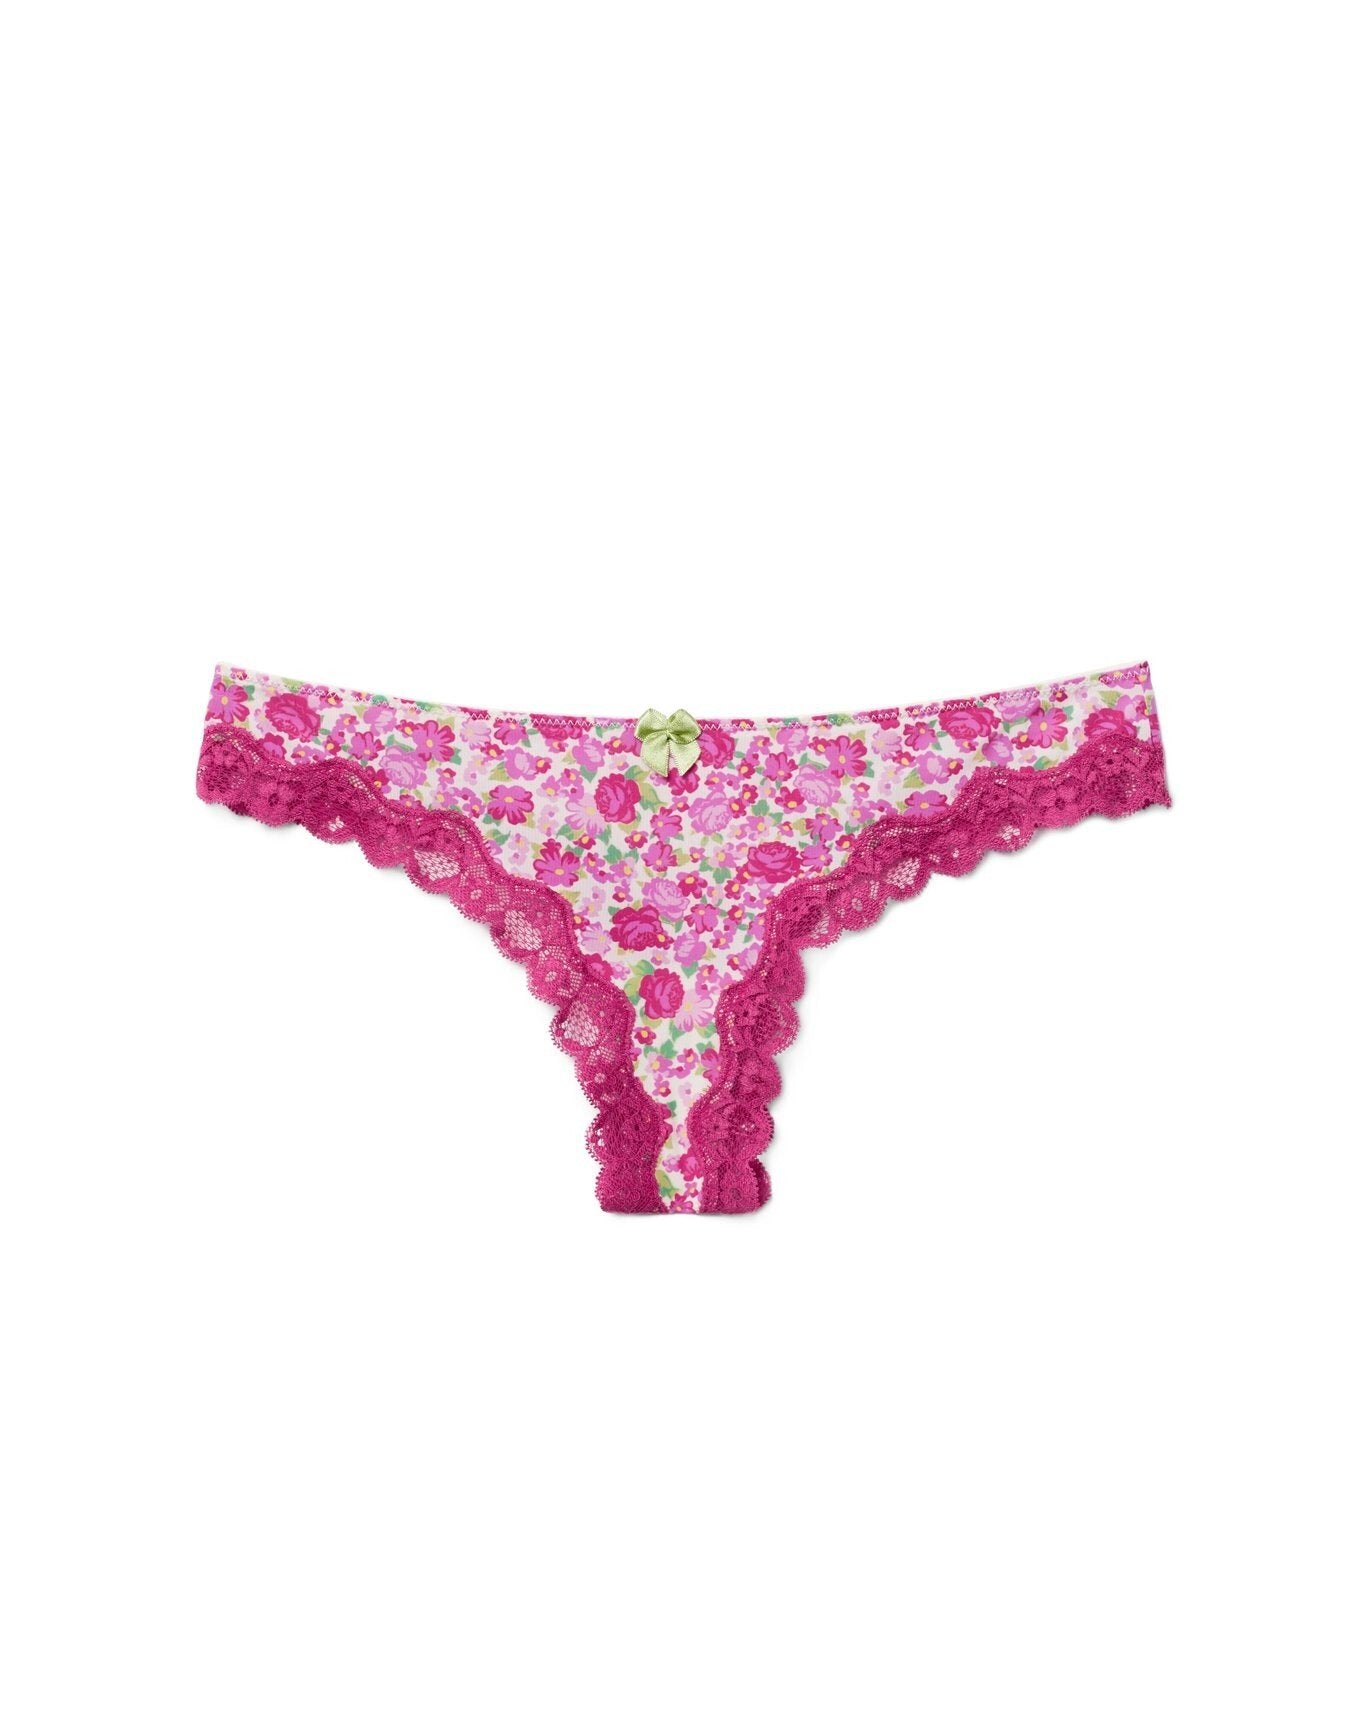 Shea Floral Pink Panty Adore Me